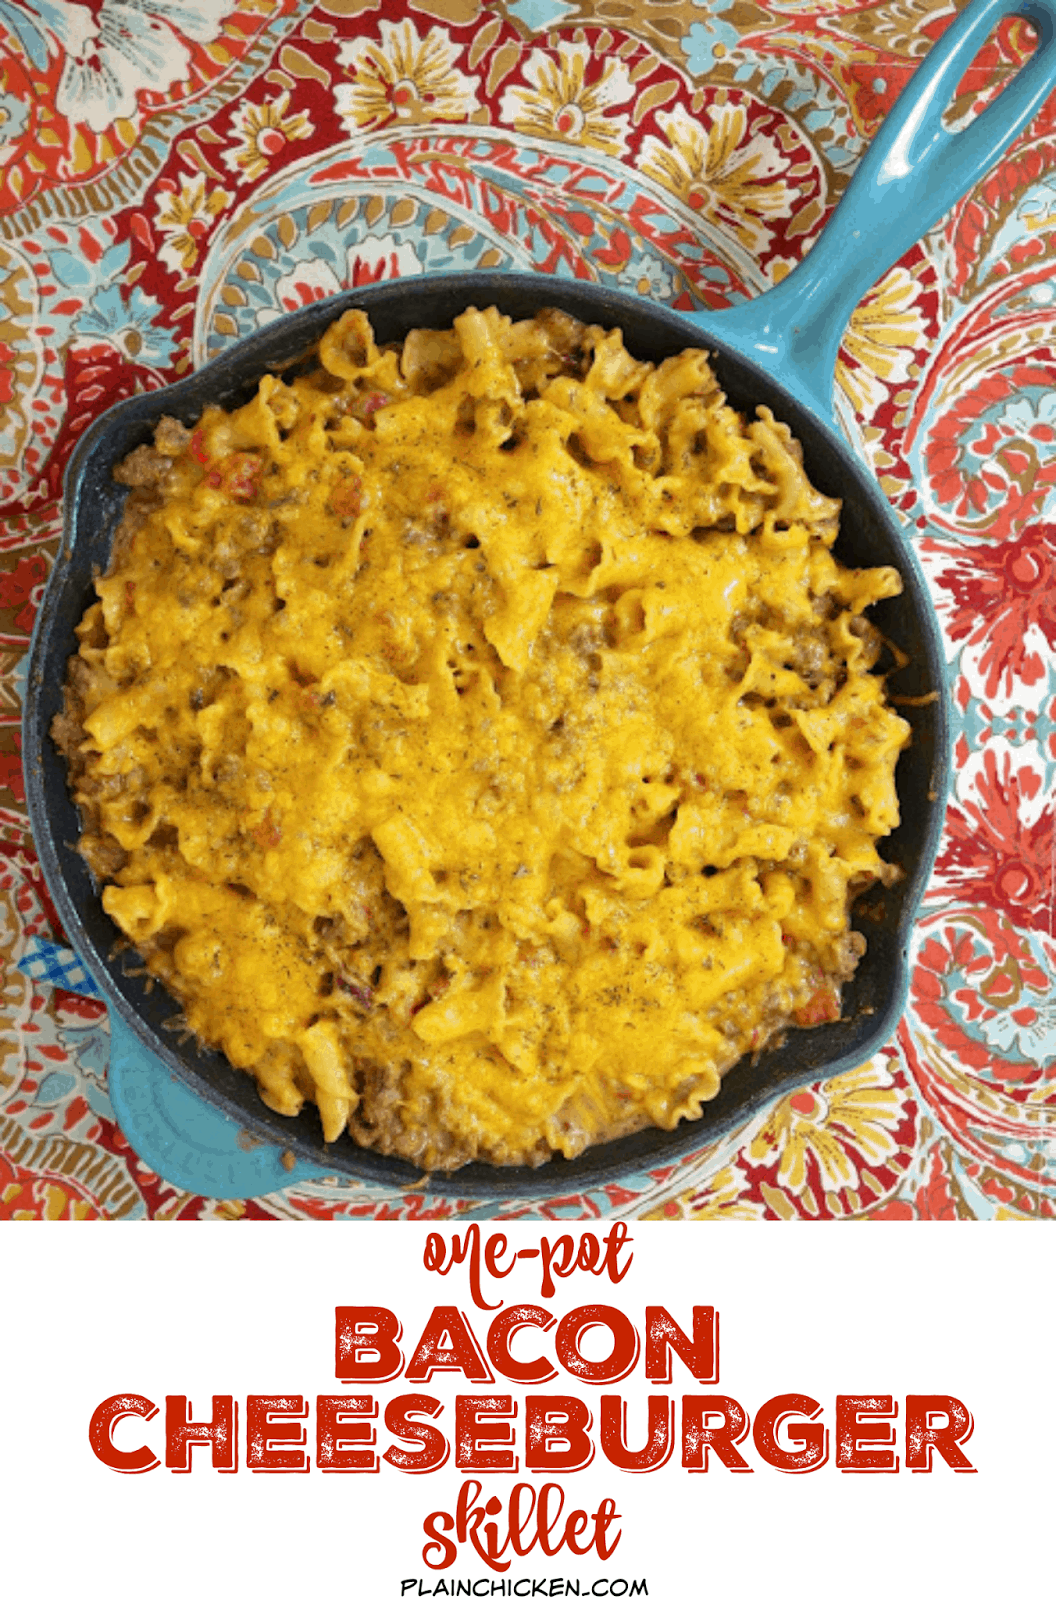 Bacon Cheeseburger Skillet {One-Pot} - everything cooks in the same pot, even the pasta! Hamburger, bacon, onion, beef broth, Rotel, cream cheese, pasta and cheddar cheese. Ready in 20 minutes!